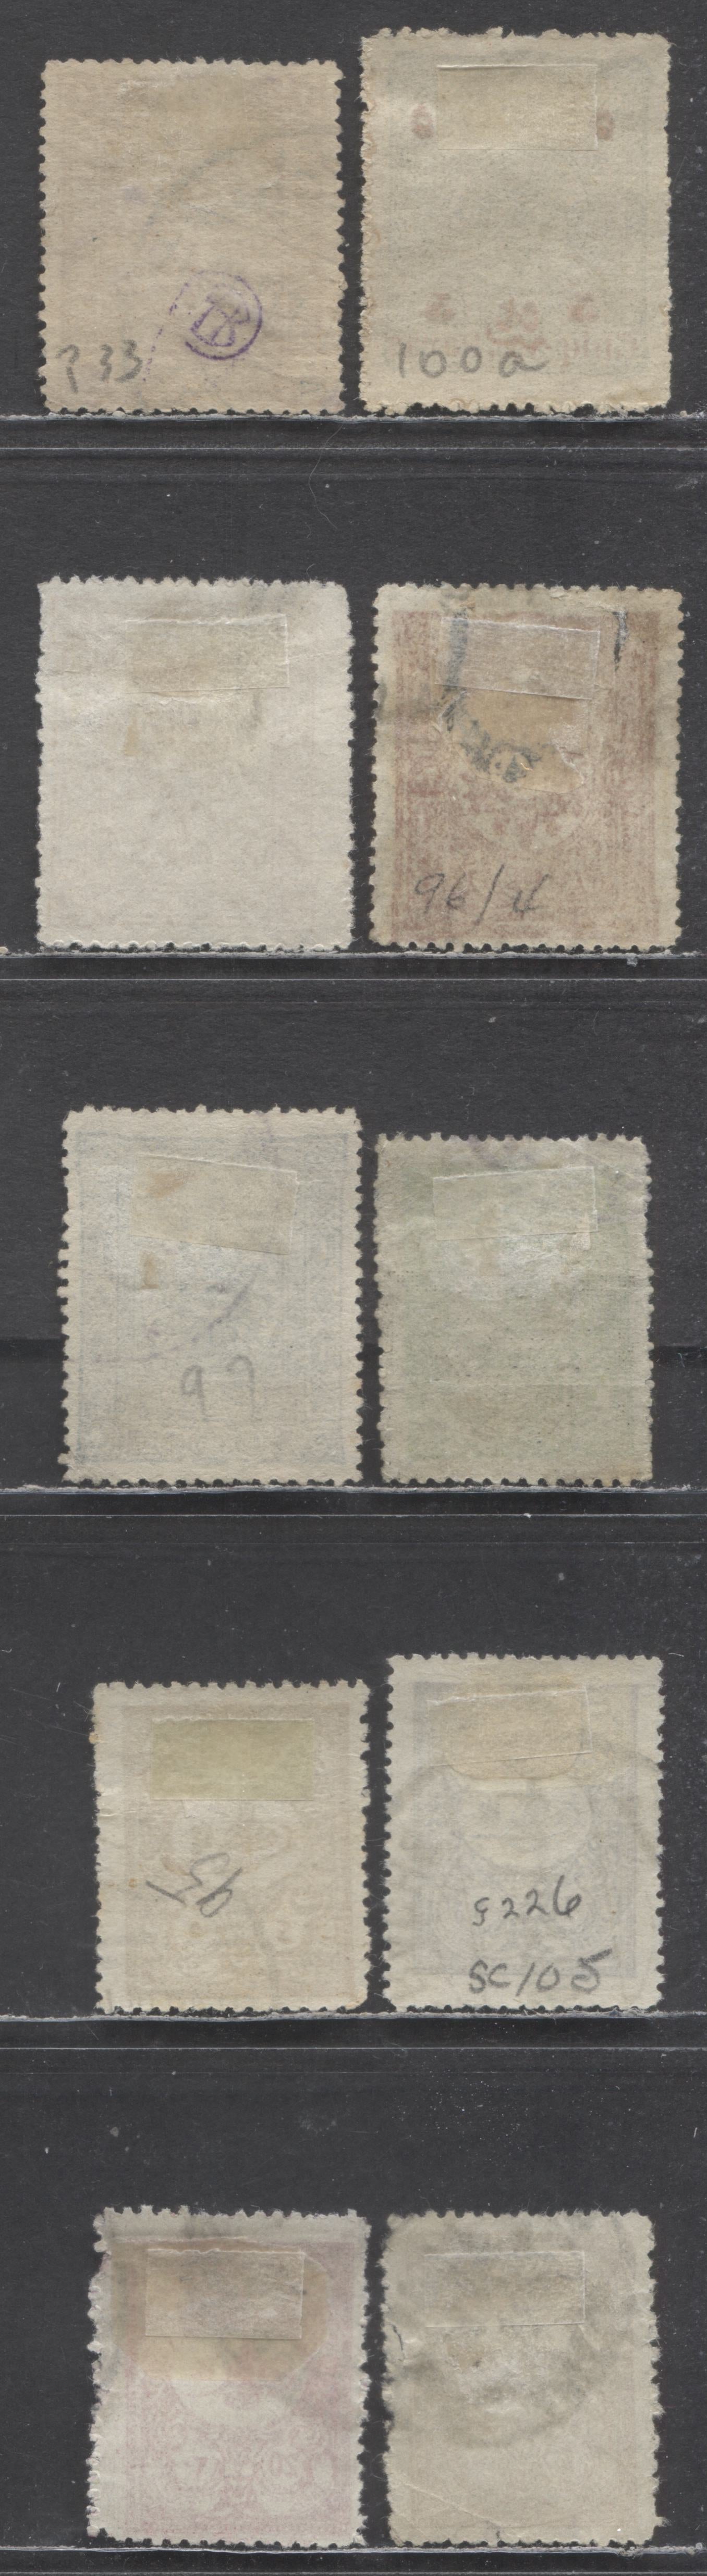 Lot 7 Turkey SC#96/p39 1892-1901 Arms, Tugha & Newspaper Overprints, 10 Fine/Very Fine Used Singles, Click on Listing to See ALL Pictures, Estimated Value $20